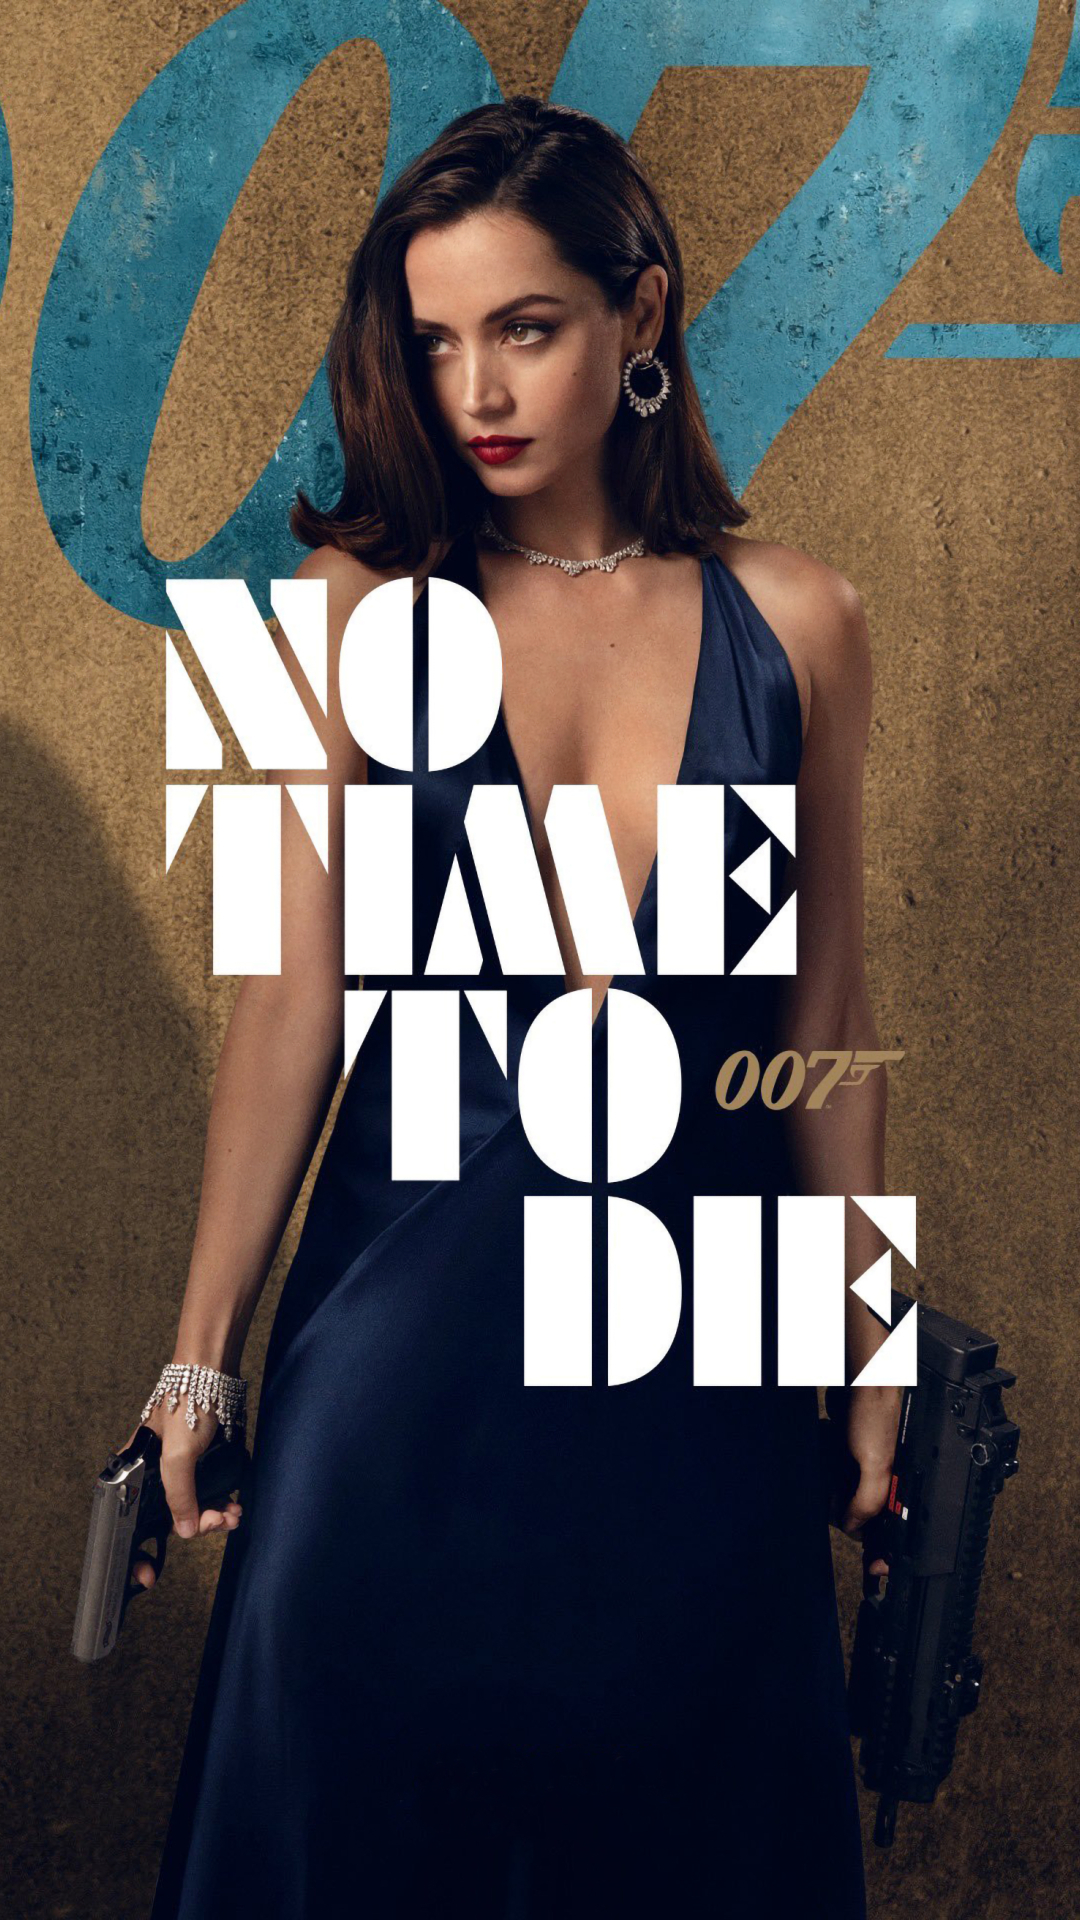 1080x19 Ana De Armas From No Time To Die Movie Iphone 7 6s 6 Plus And Pixel Xl One Plus 3 3t 5 Wallpaper Hd Movies 4k Wallpapers Images Photos And Background